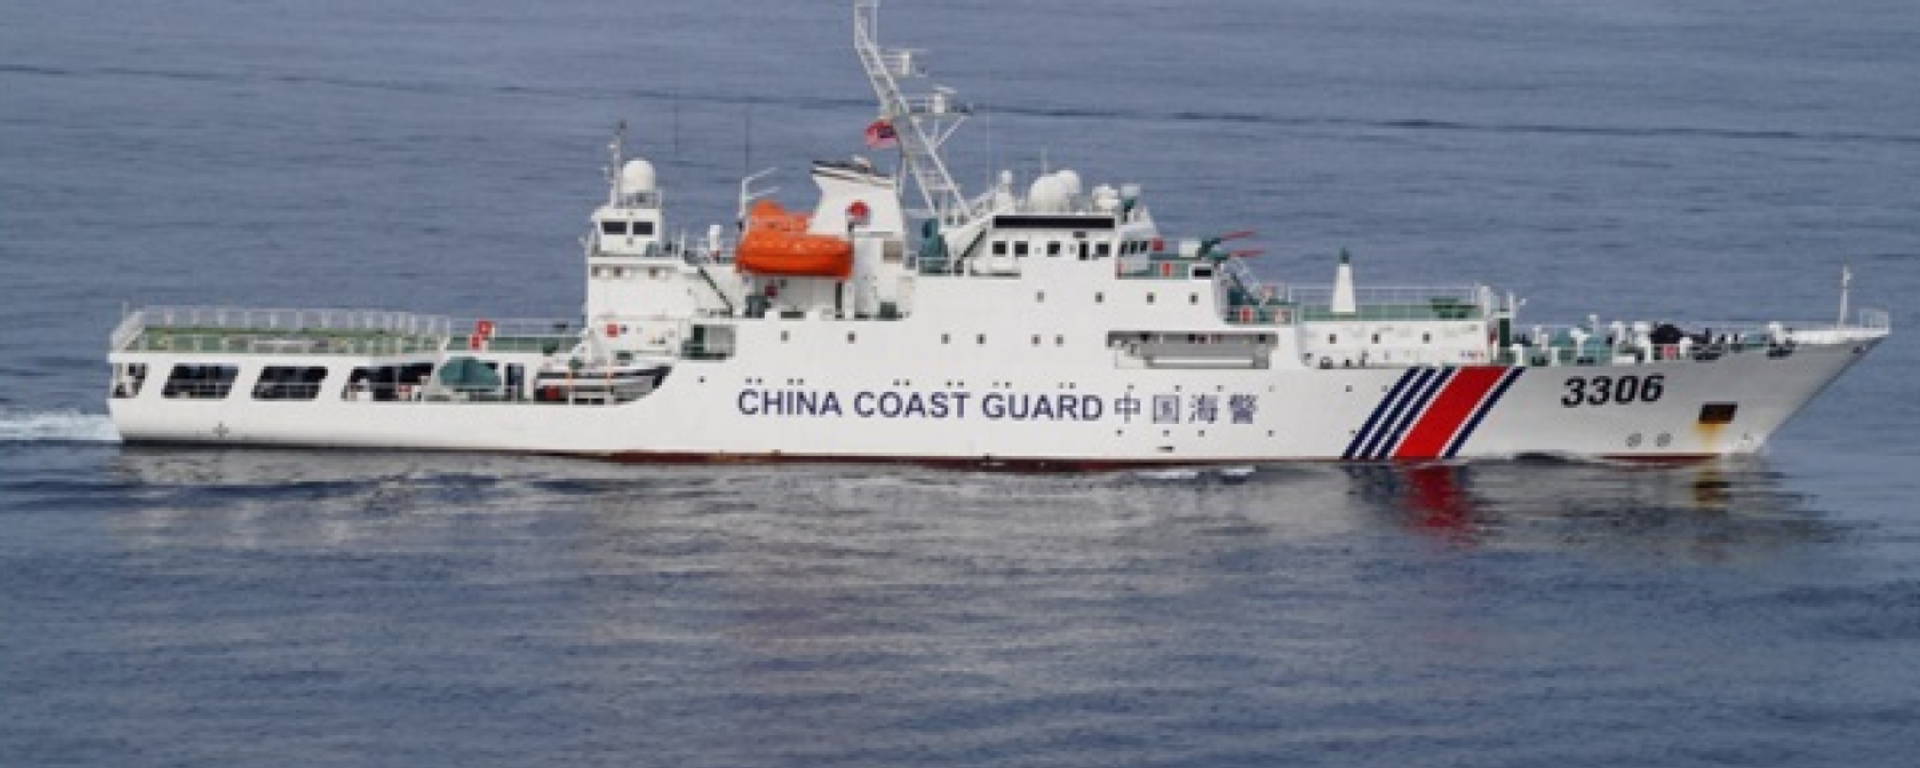 A China Coast Guard ship participates in the ASEAN Regional Forum (ARF) Disaster Relief Exercise (DiREx) 2015 in Penang, Northern Malaysia - Sputnik International, 1920, 31.08.2021